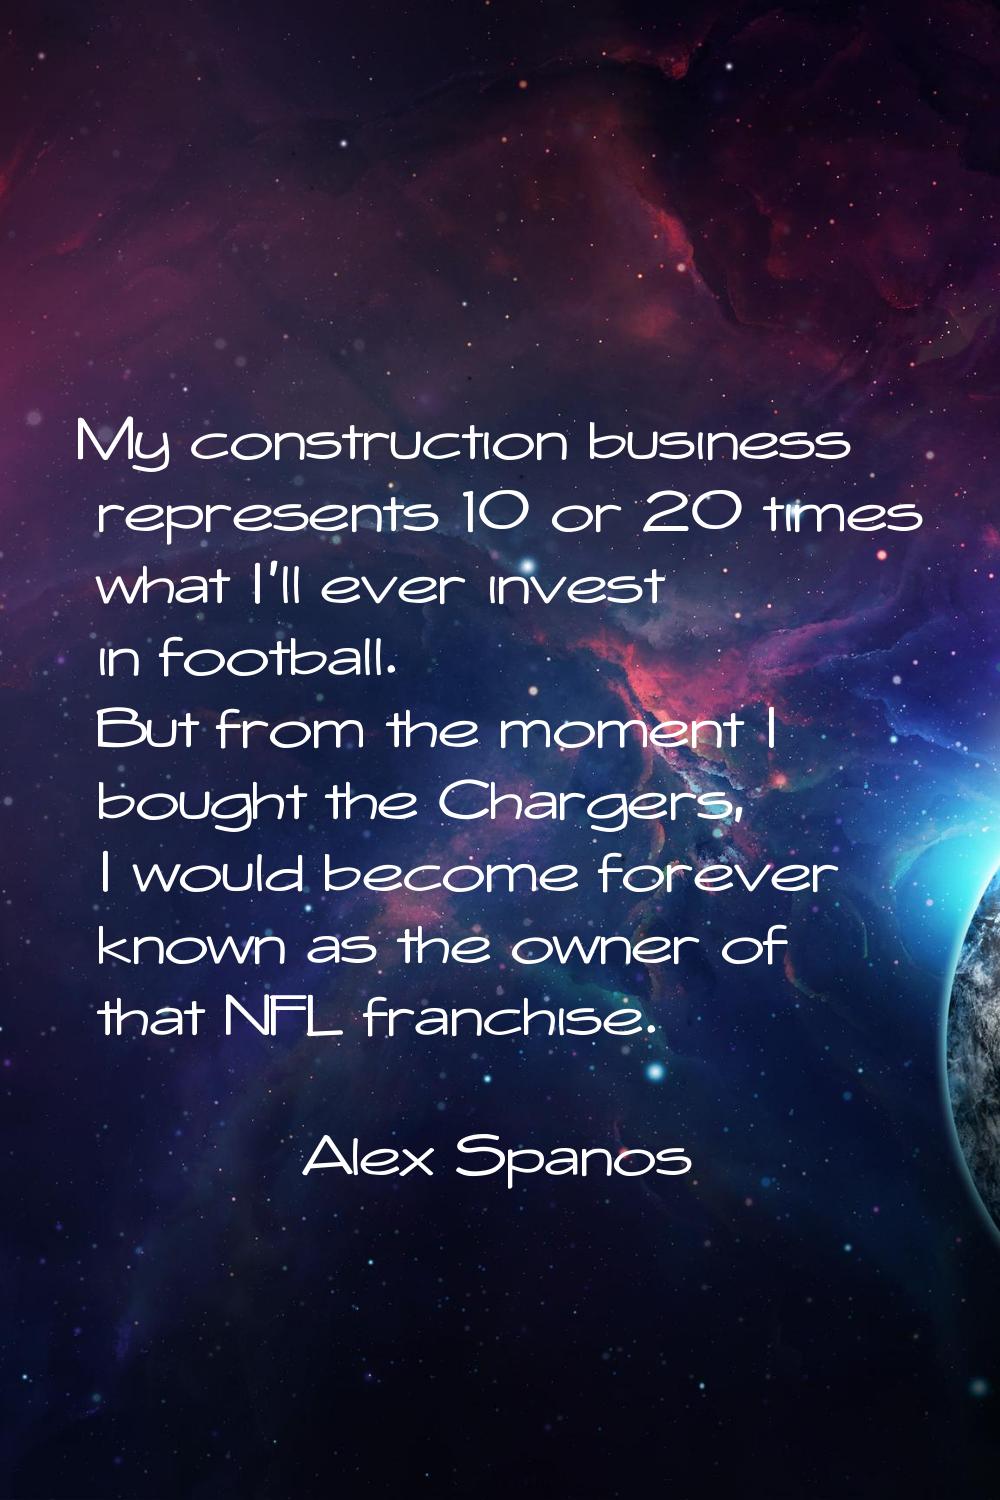 My construction business represents 10 or 20 times what I'll ever invest in football. But from the 